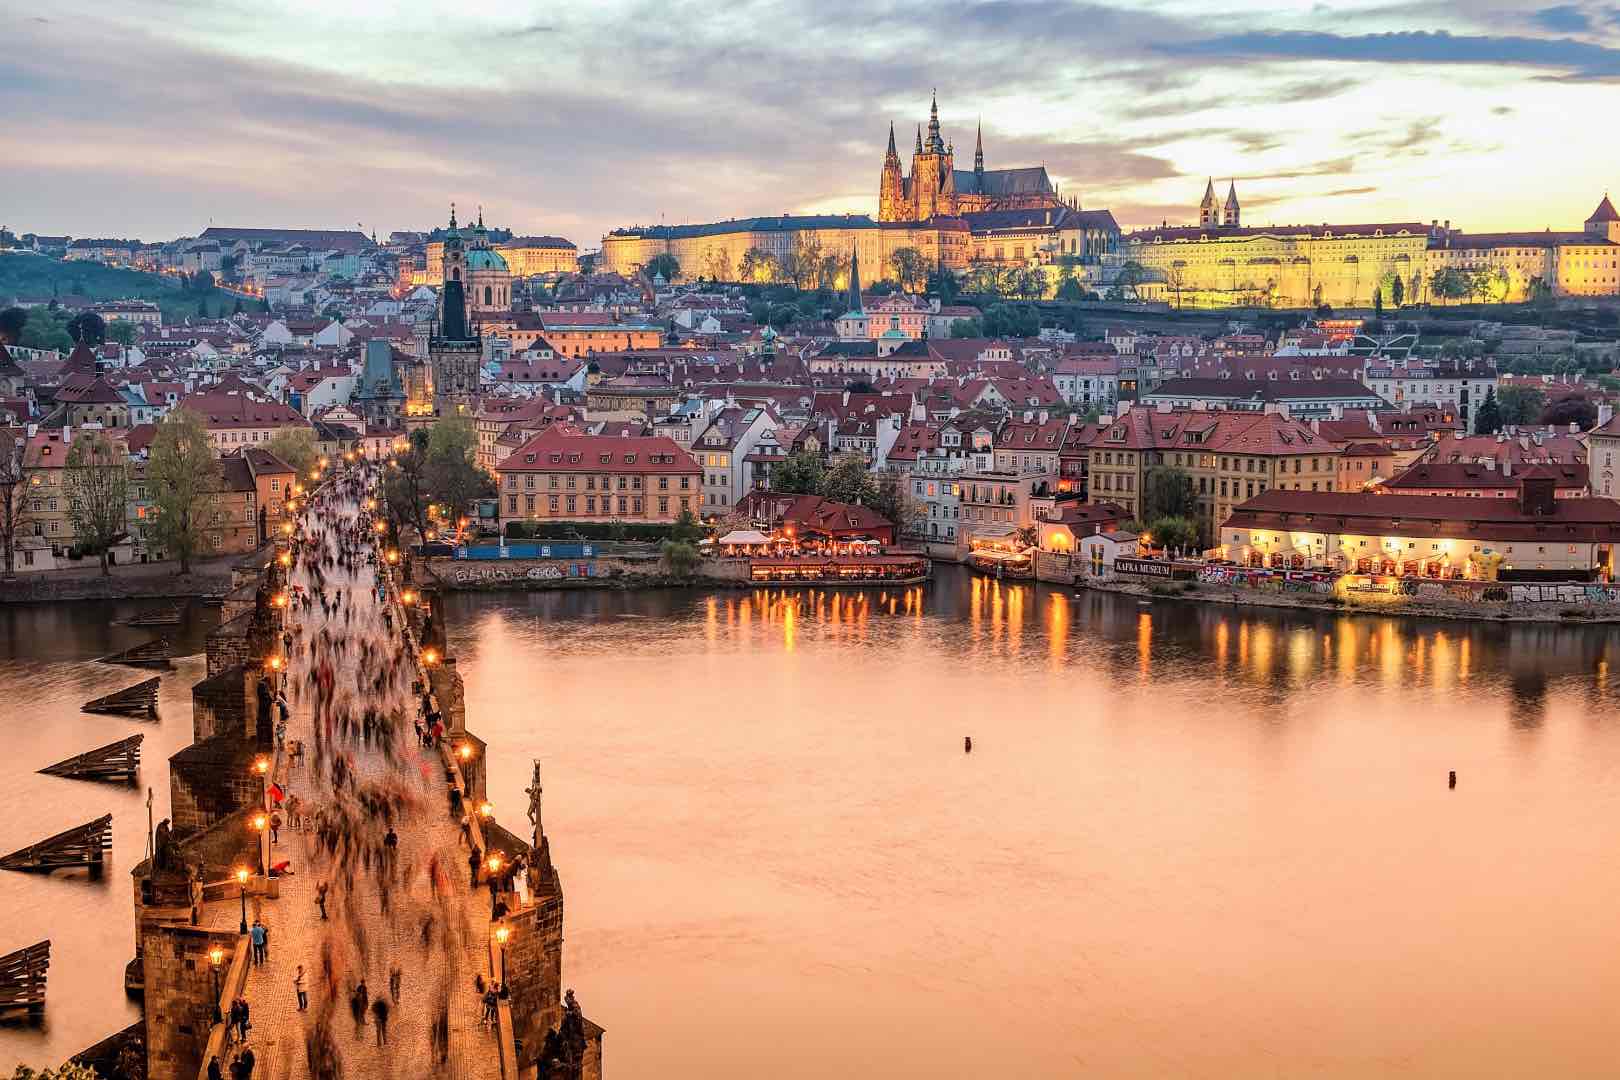 Charles bridge and castle view